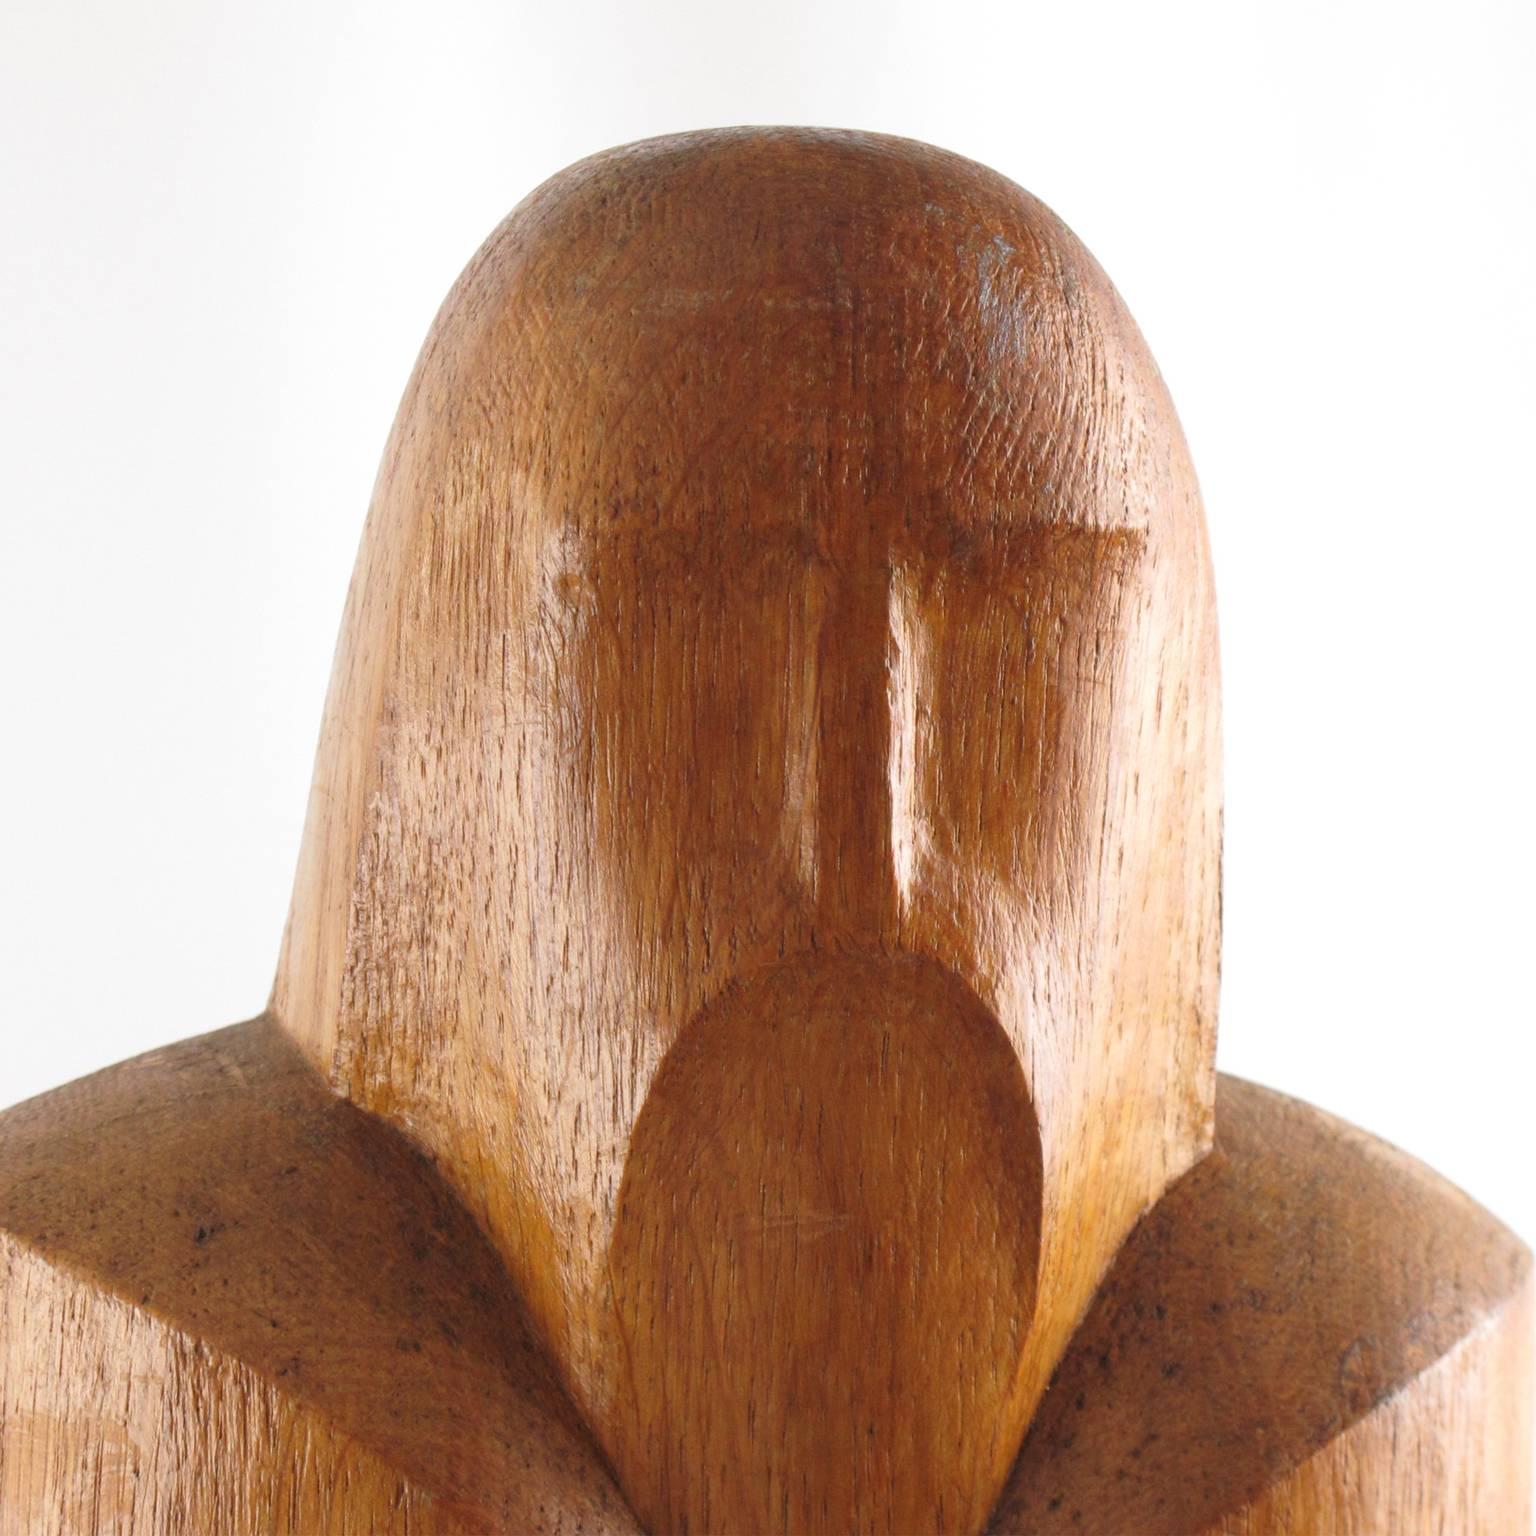 Rare Wood Sculpture Monk or Knight Design by Wenzel Profant, circa 1950s 2